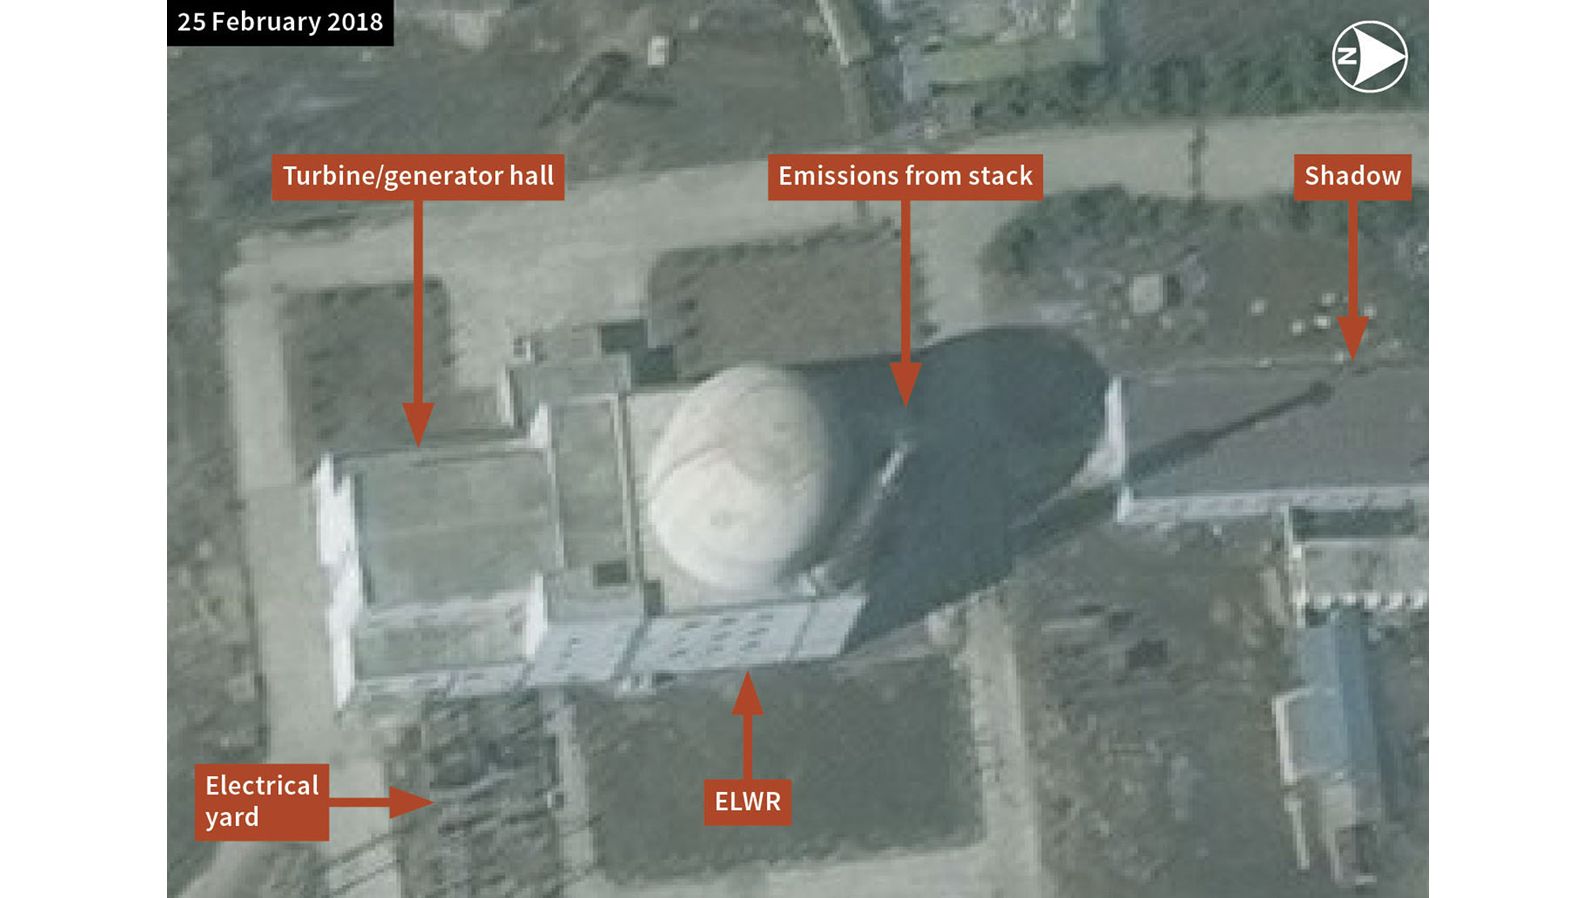 DigitalGlobe imagery showing emissions from the stack at the Yongbyon experimental light water reactor in February.